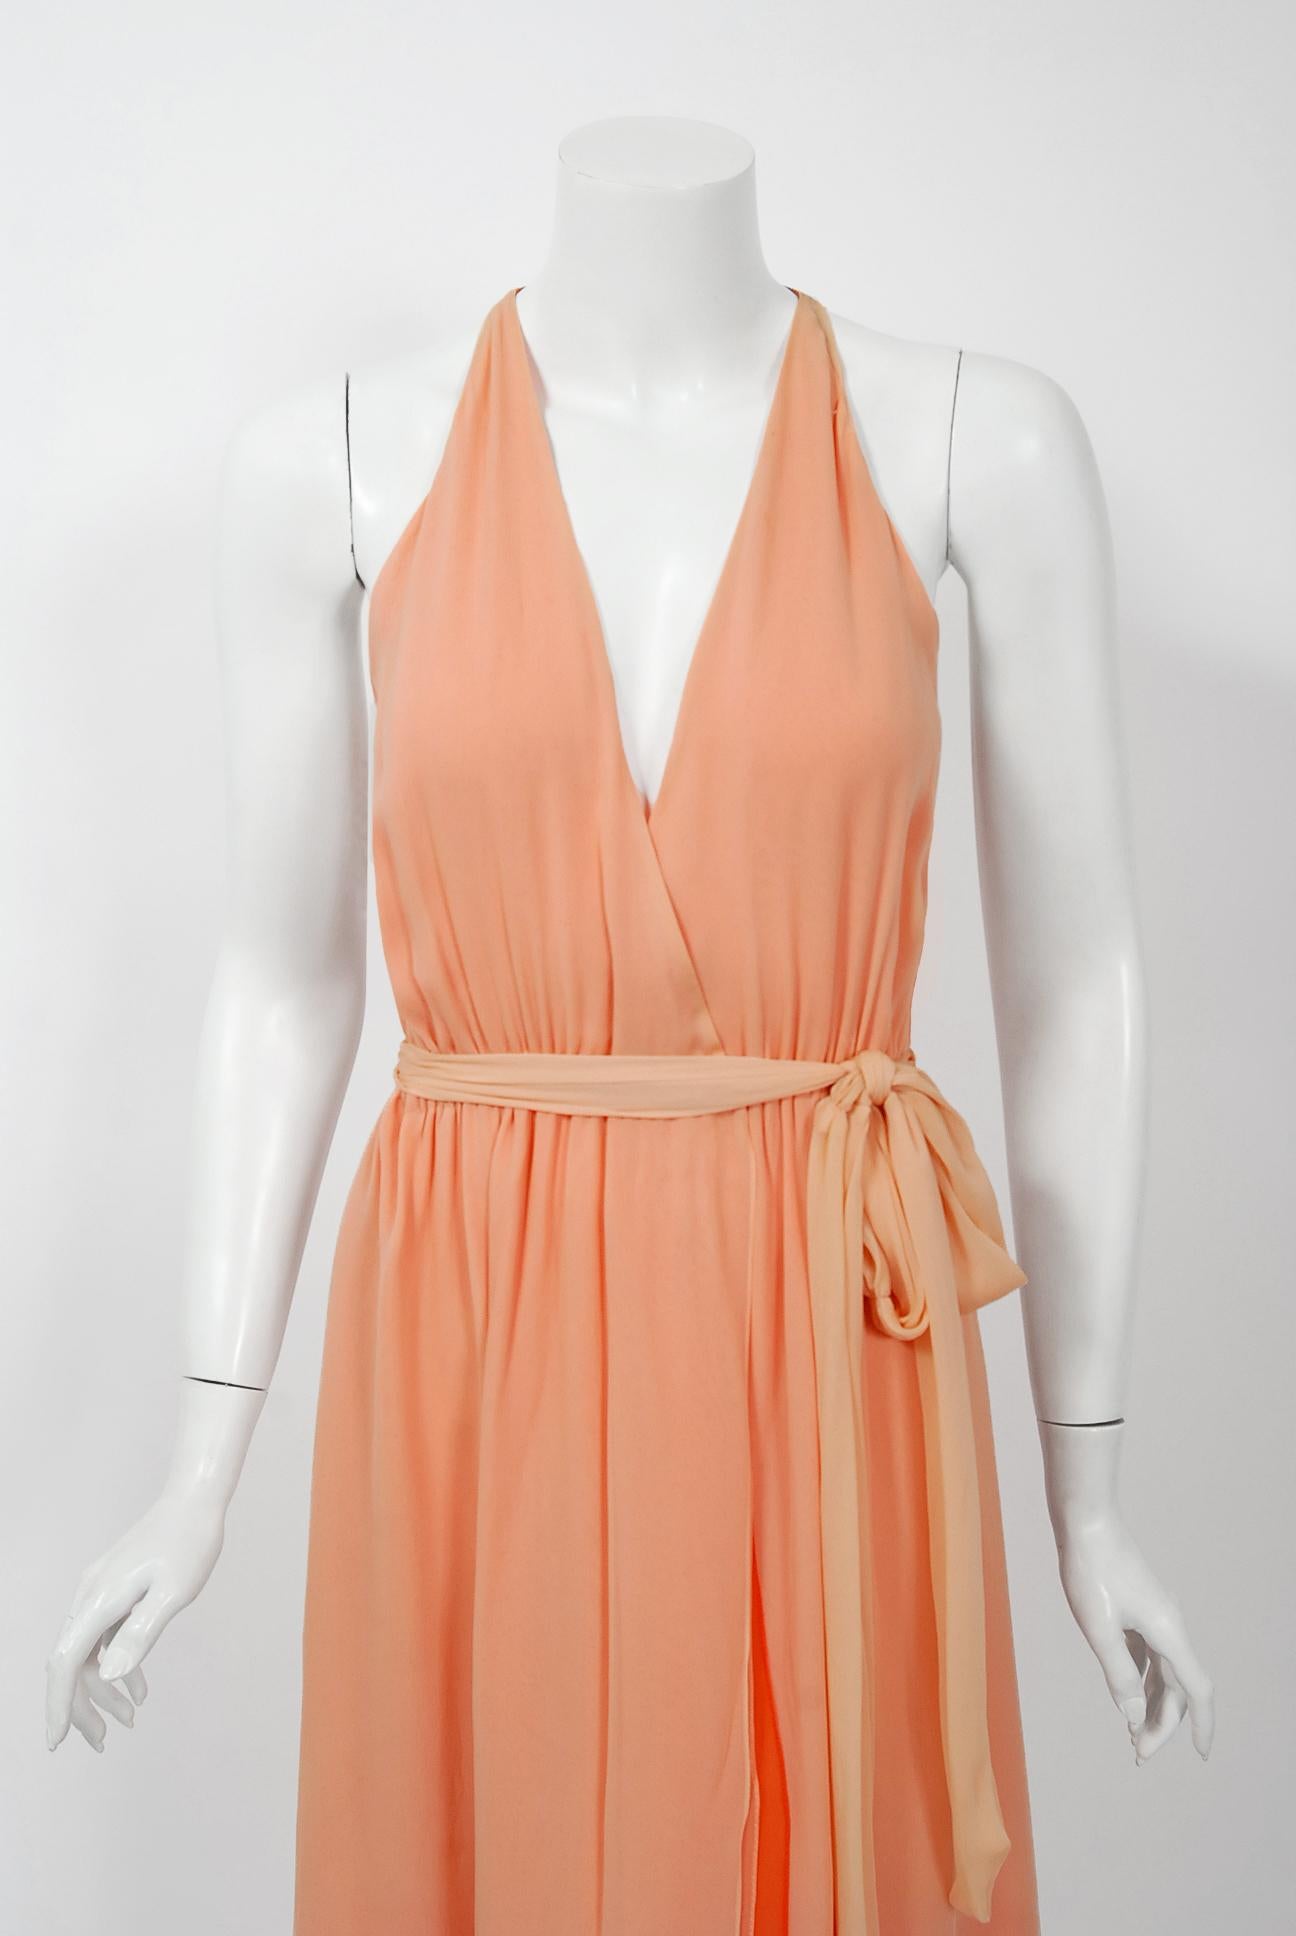 Gorgeous Halston Couture peach ombre wrap dress dating back to the mid 1970's. Halston revolutionized the way women dress and is one of the few designers, alongside Claire McCardell and Norman Norell, to define what is American fashion. Throughout